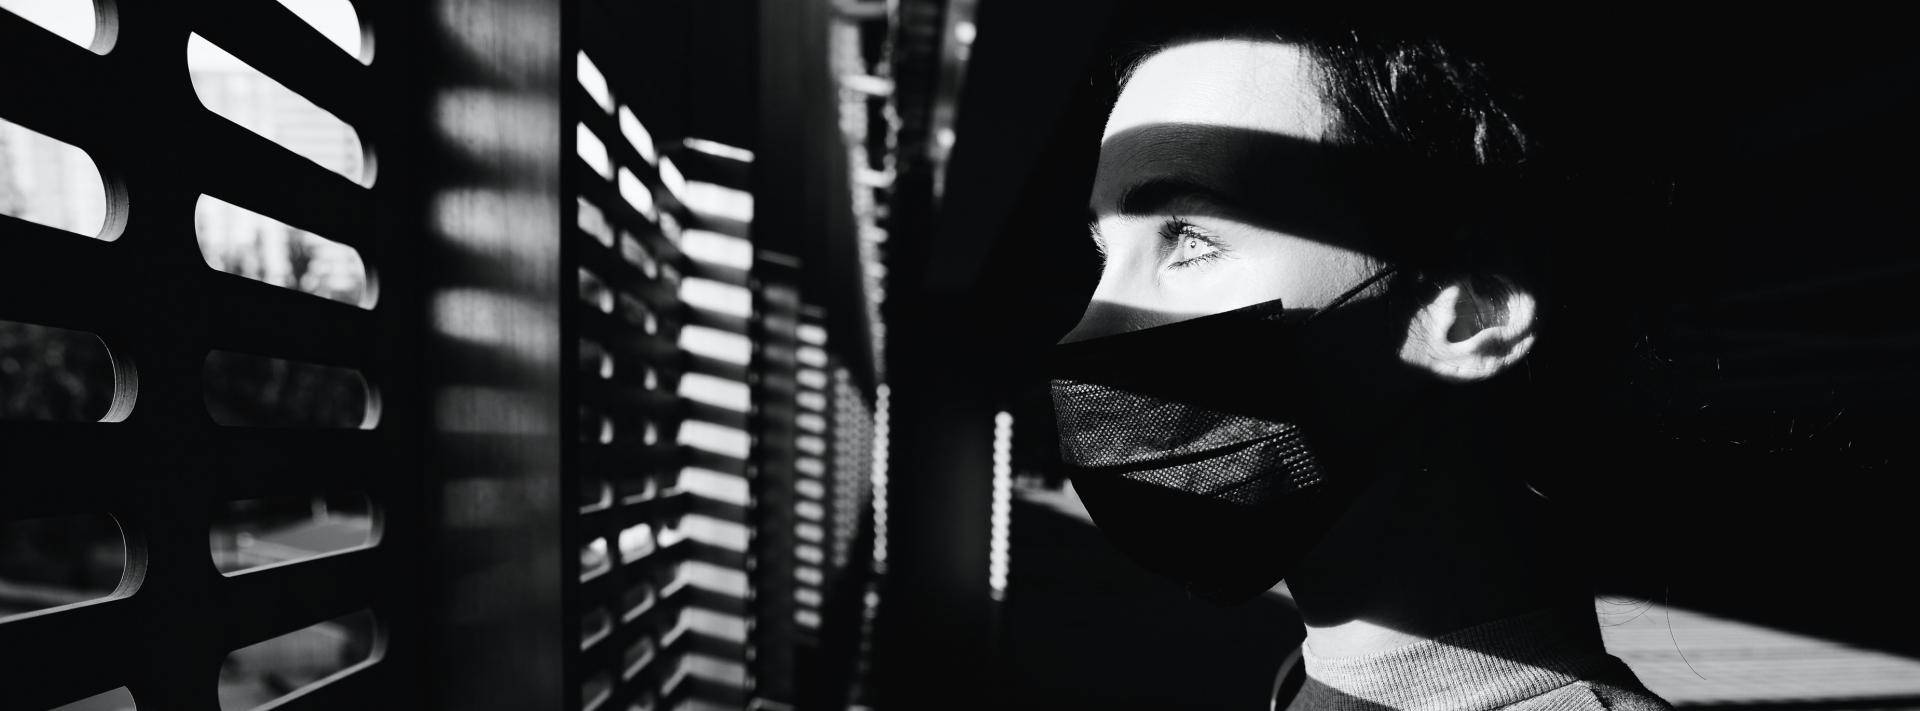 woman looking out blinds while wearing a mask - black and white image